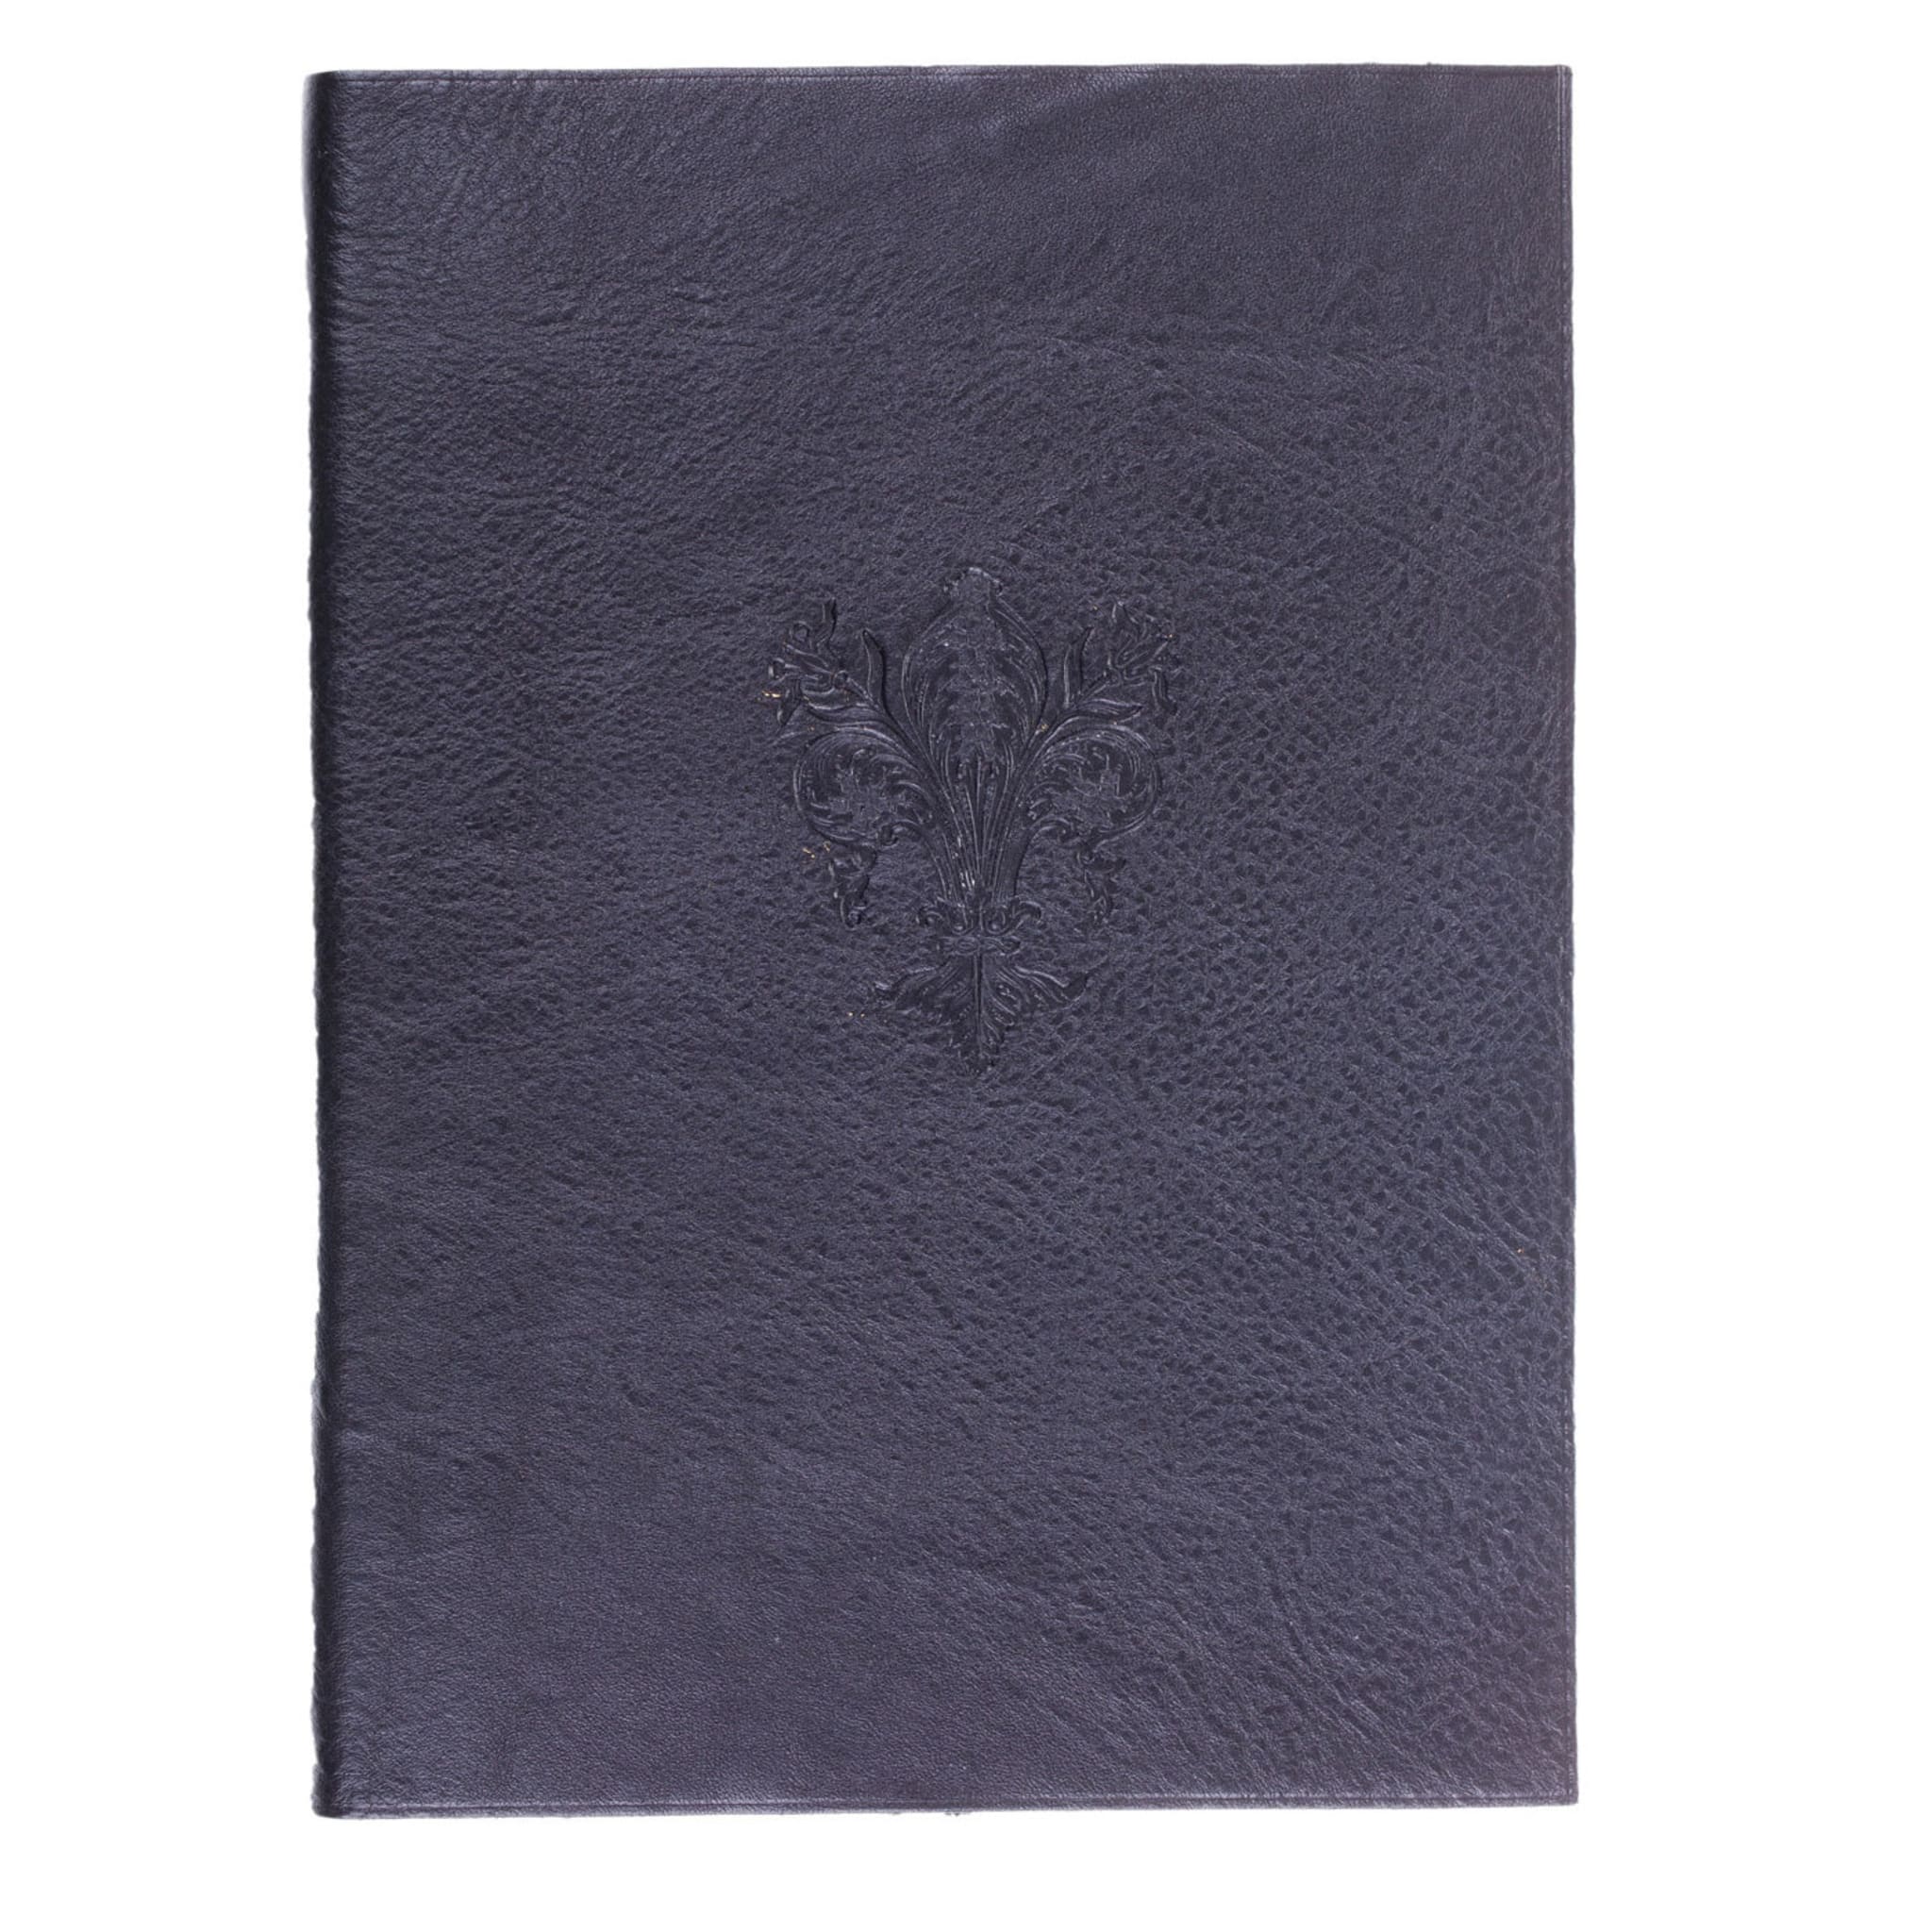 Lily Black Leather Notebook - Alternative view 2